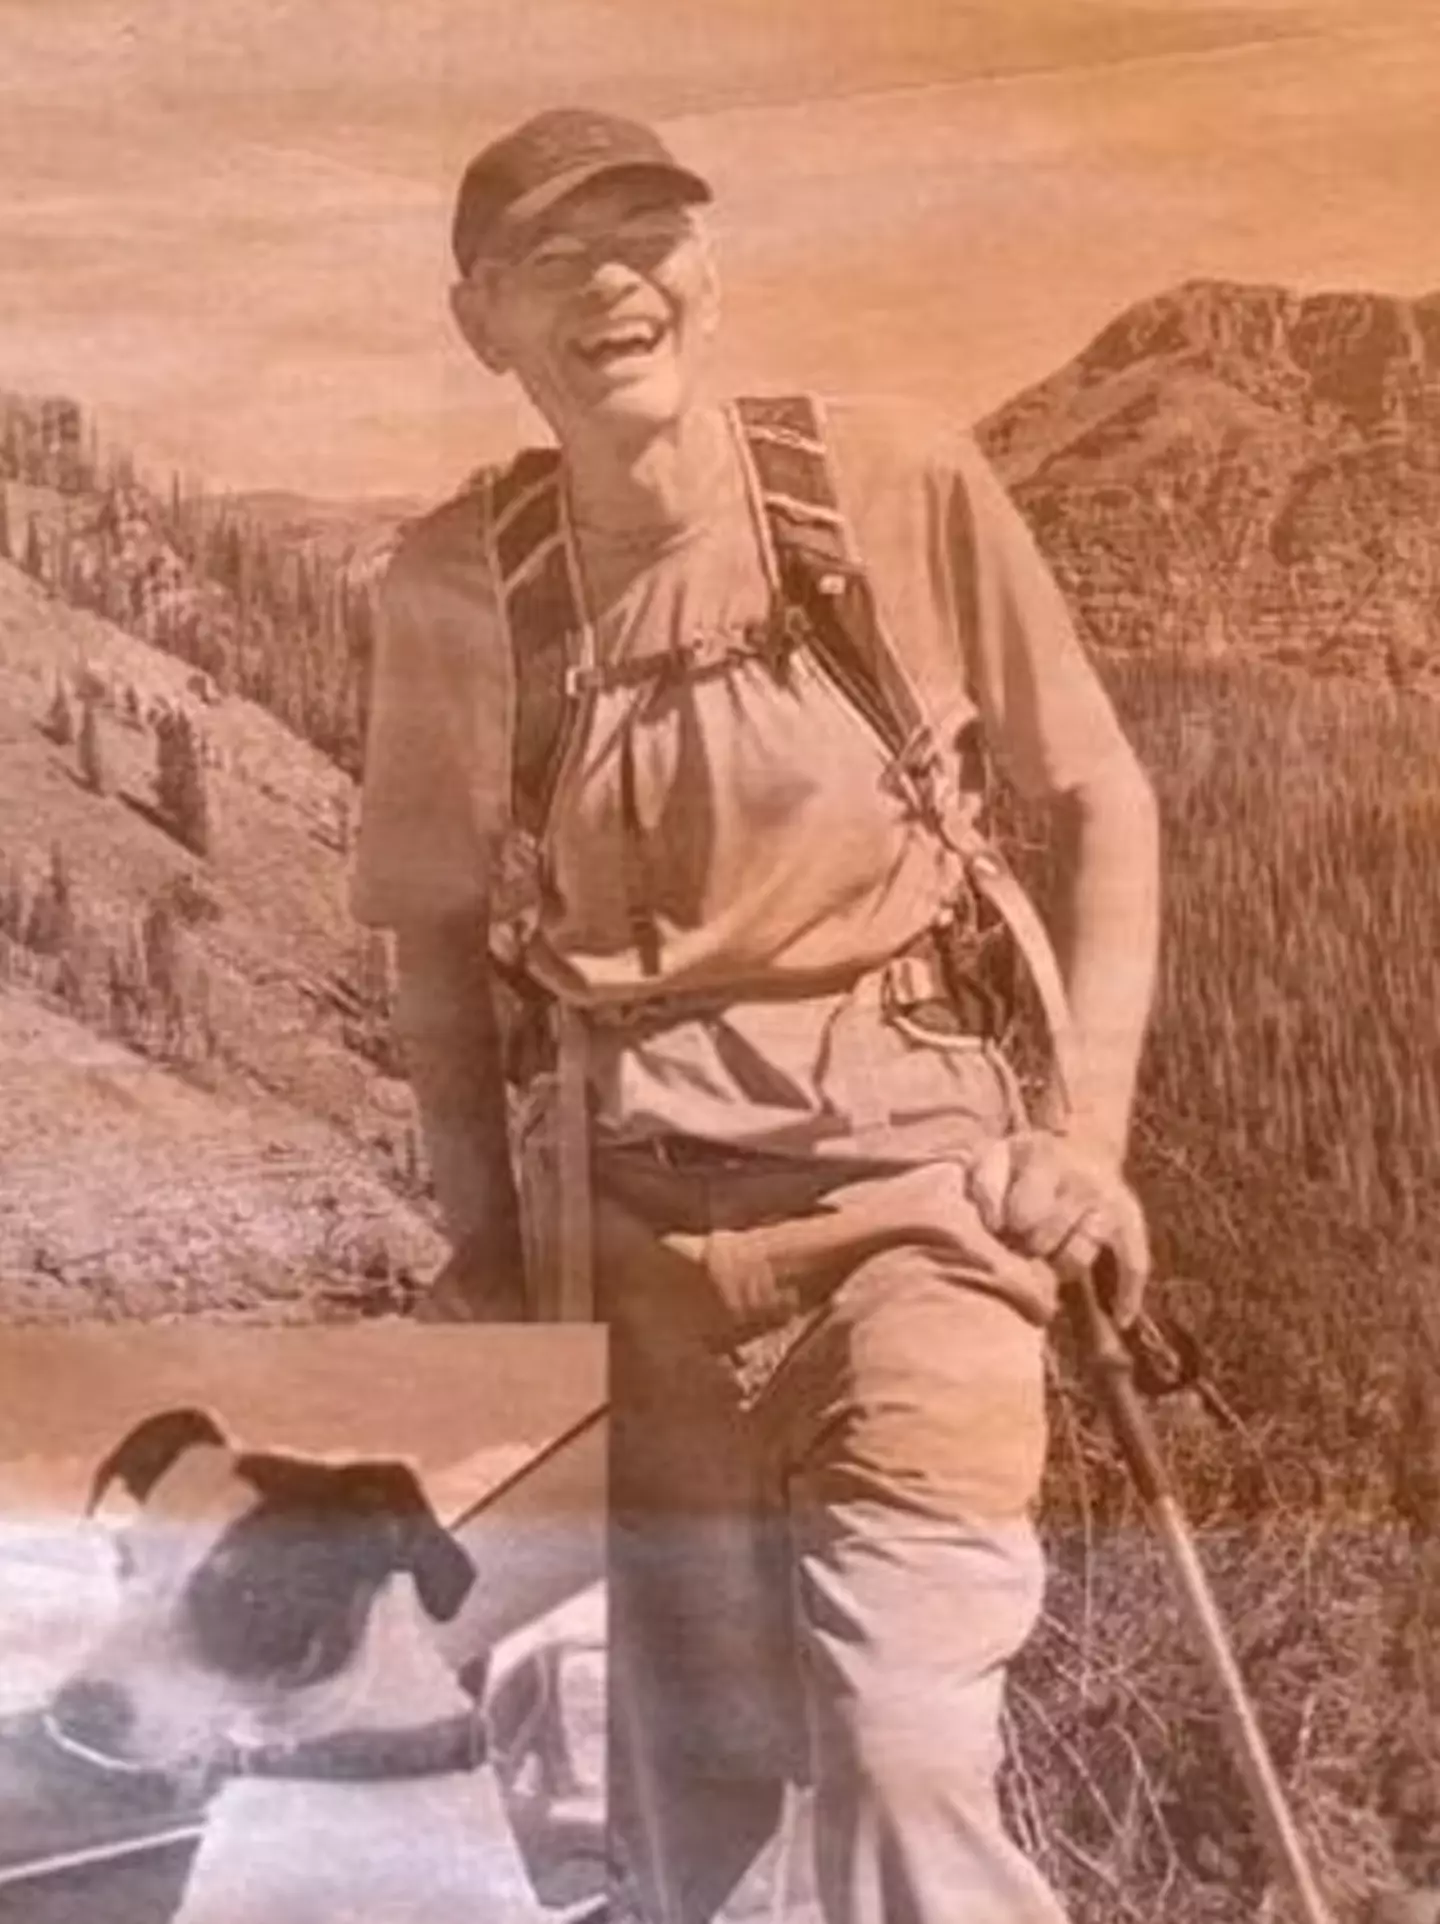 Rich Moore went missing after setting off on a hike in the Colorado mountains in August.